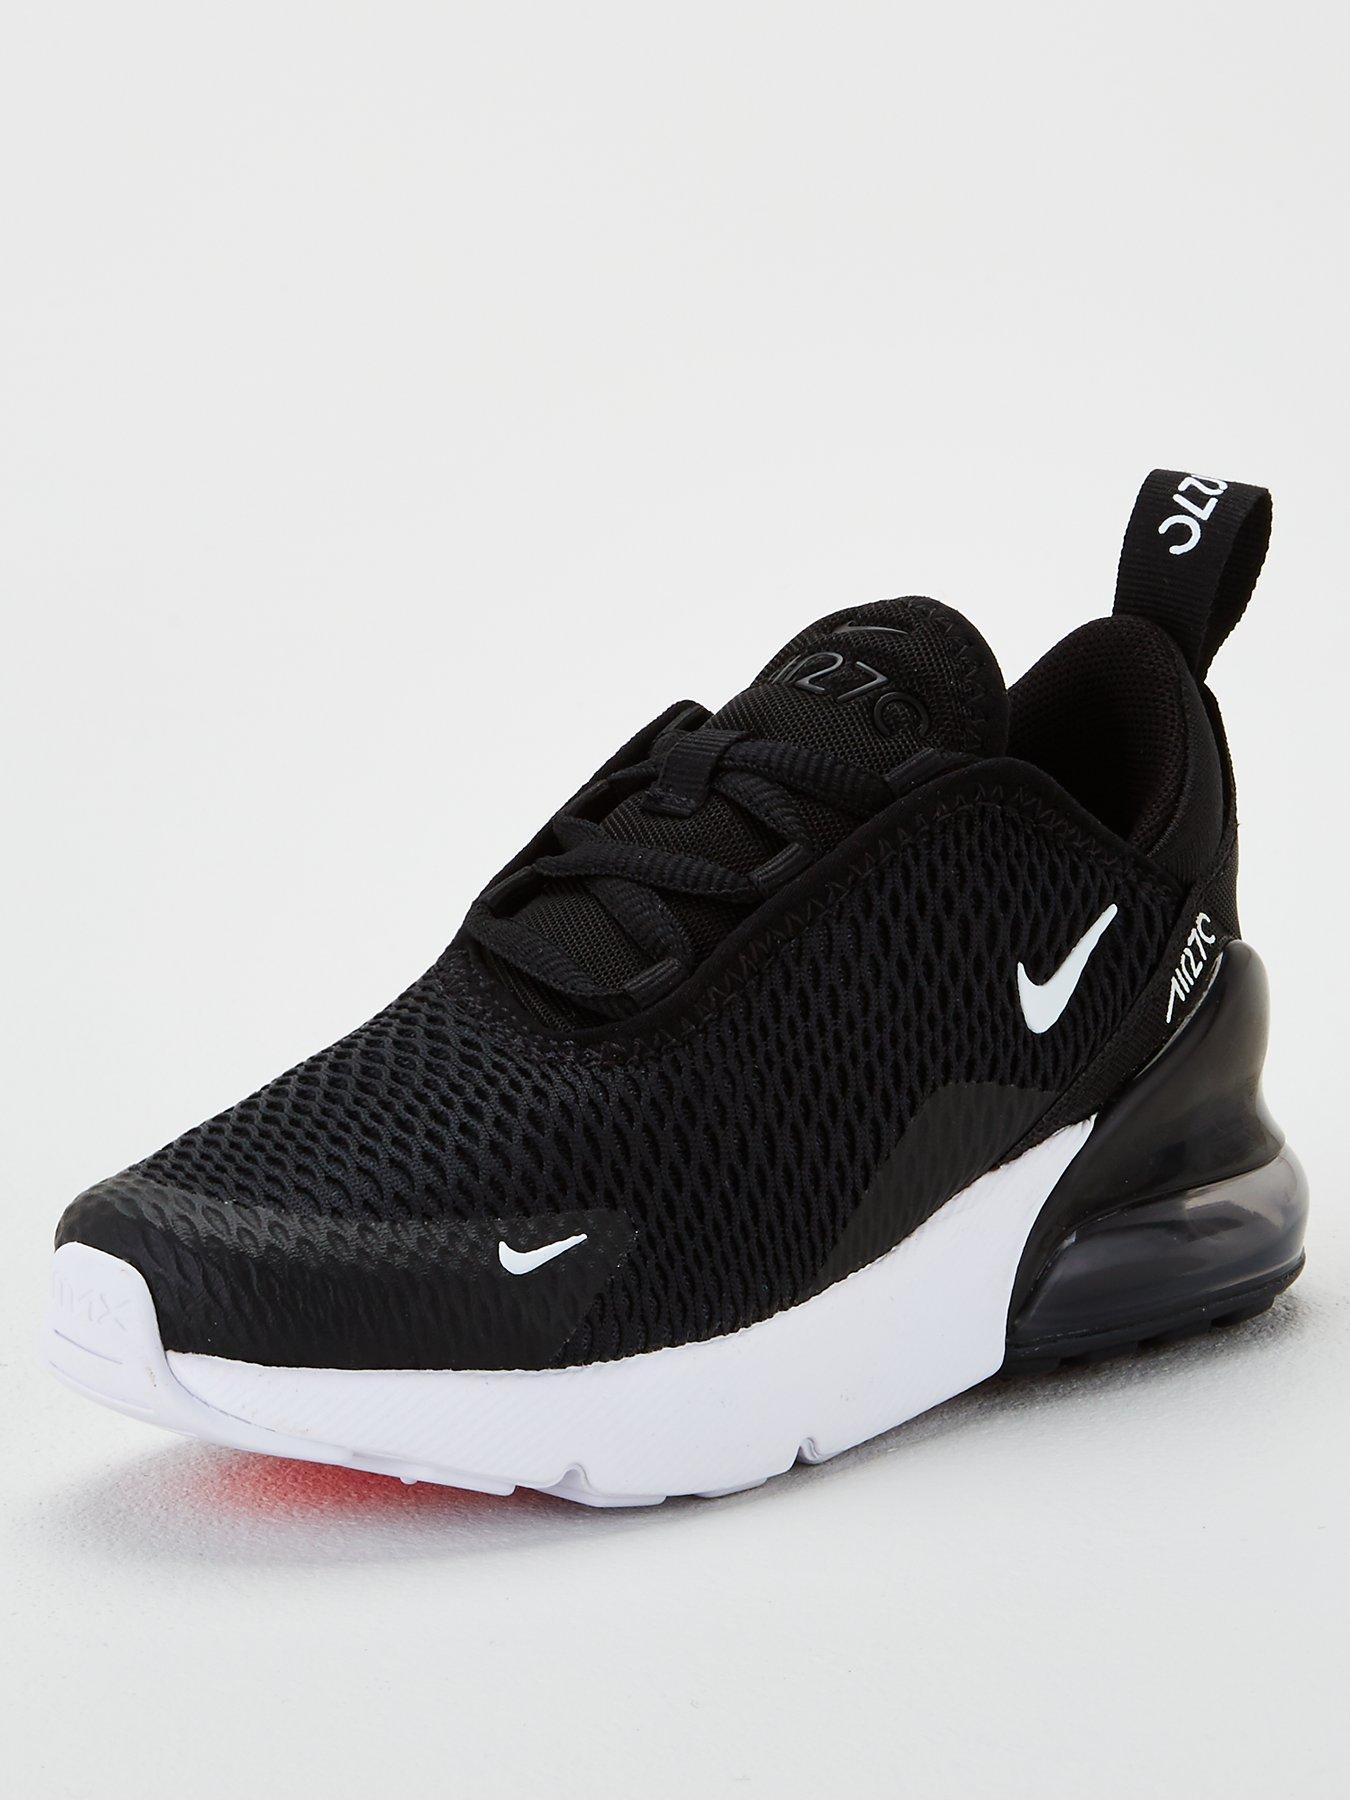 can i put air max 270 in the washing machine